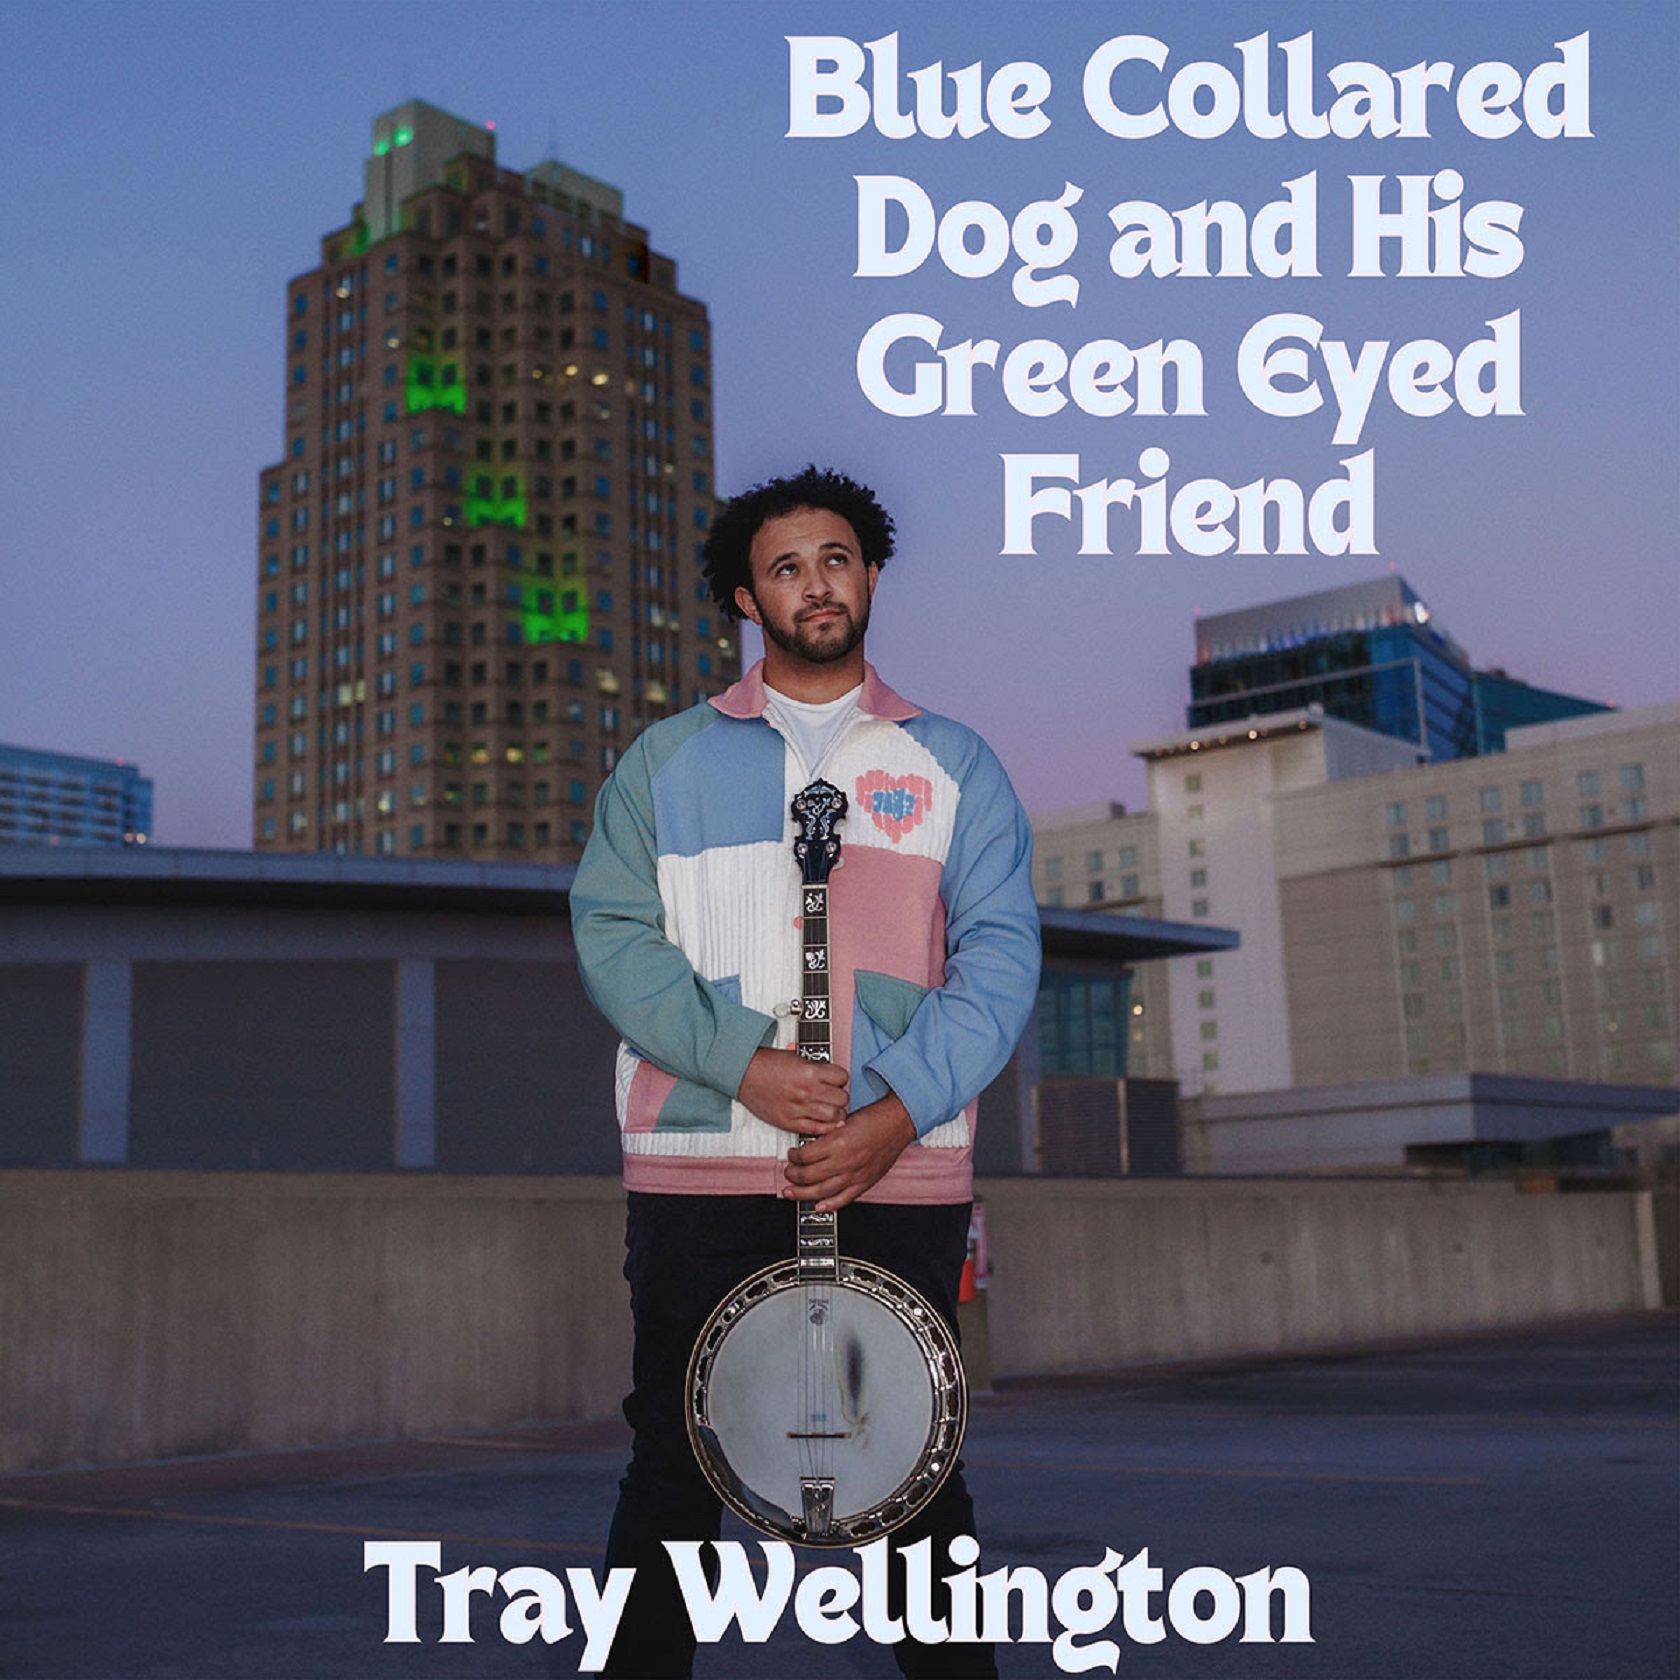 Tray Wellington’s "Blue Collared Dog and His Green Eyed Friend" is rooted in his abundant creativity